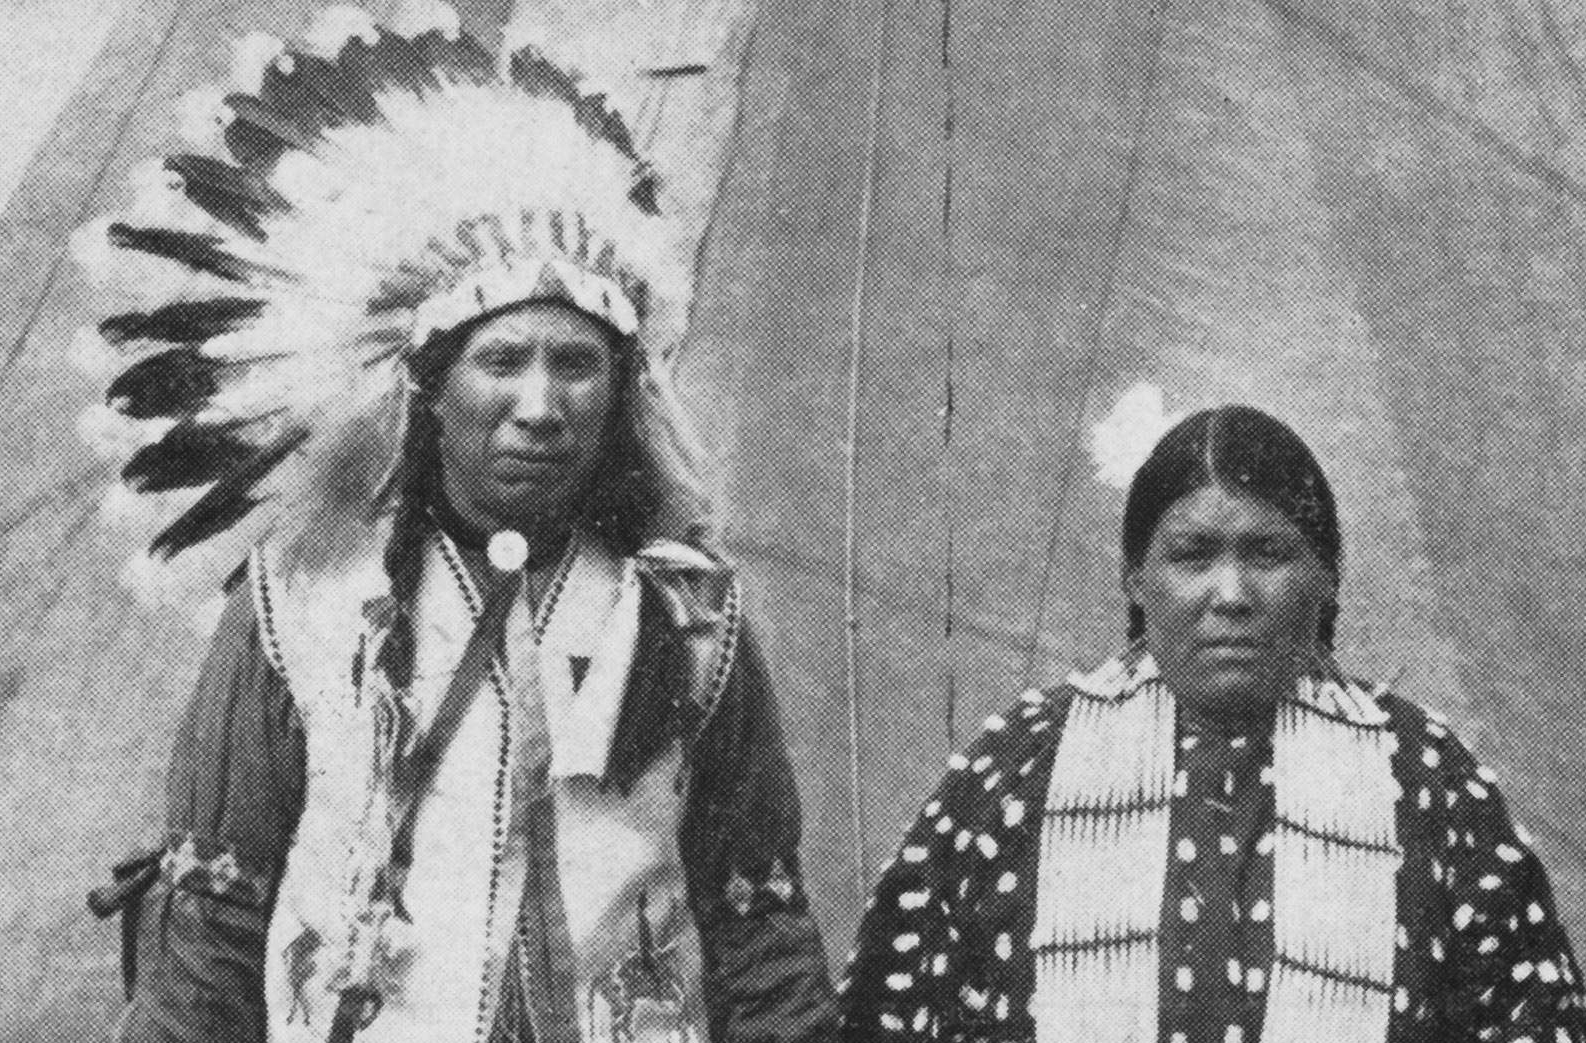 "Two Sioux Indians in Native Dress in Front of Teepee"